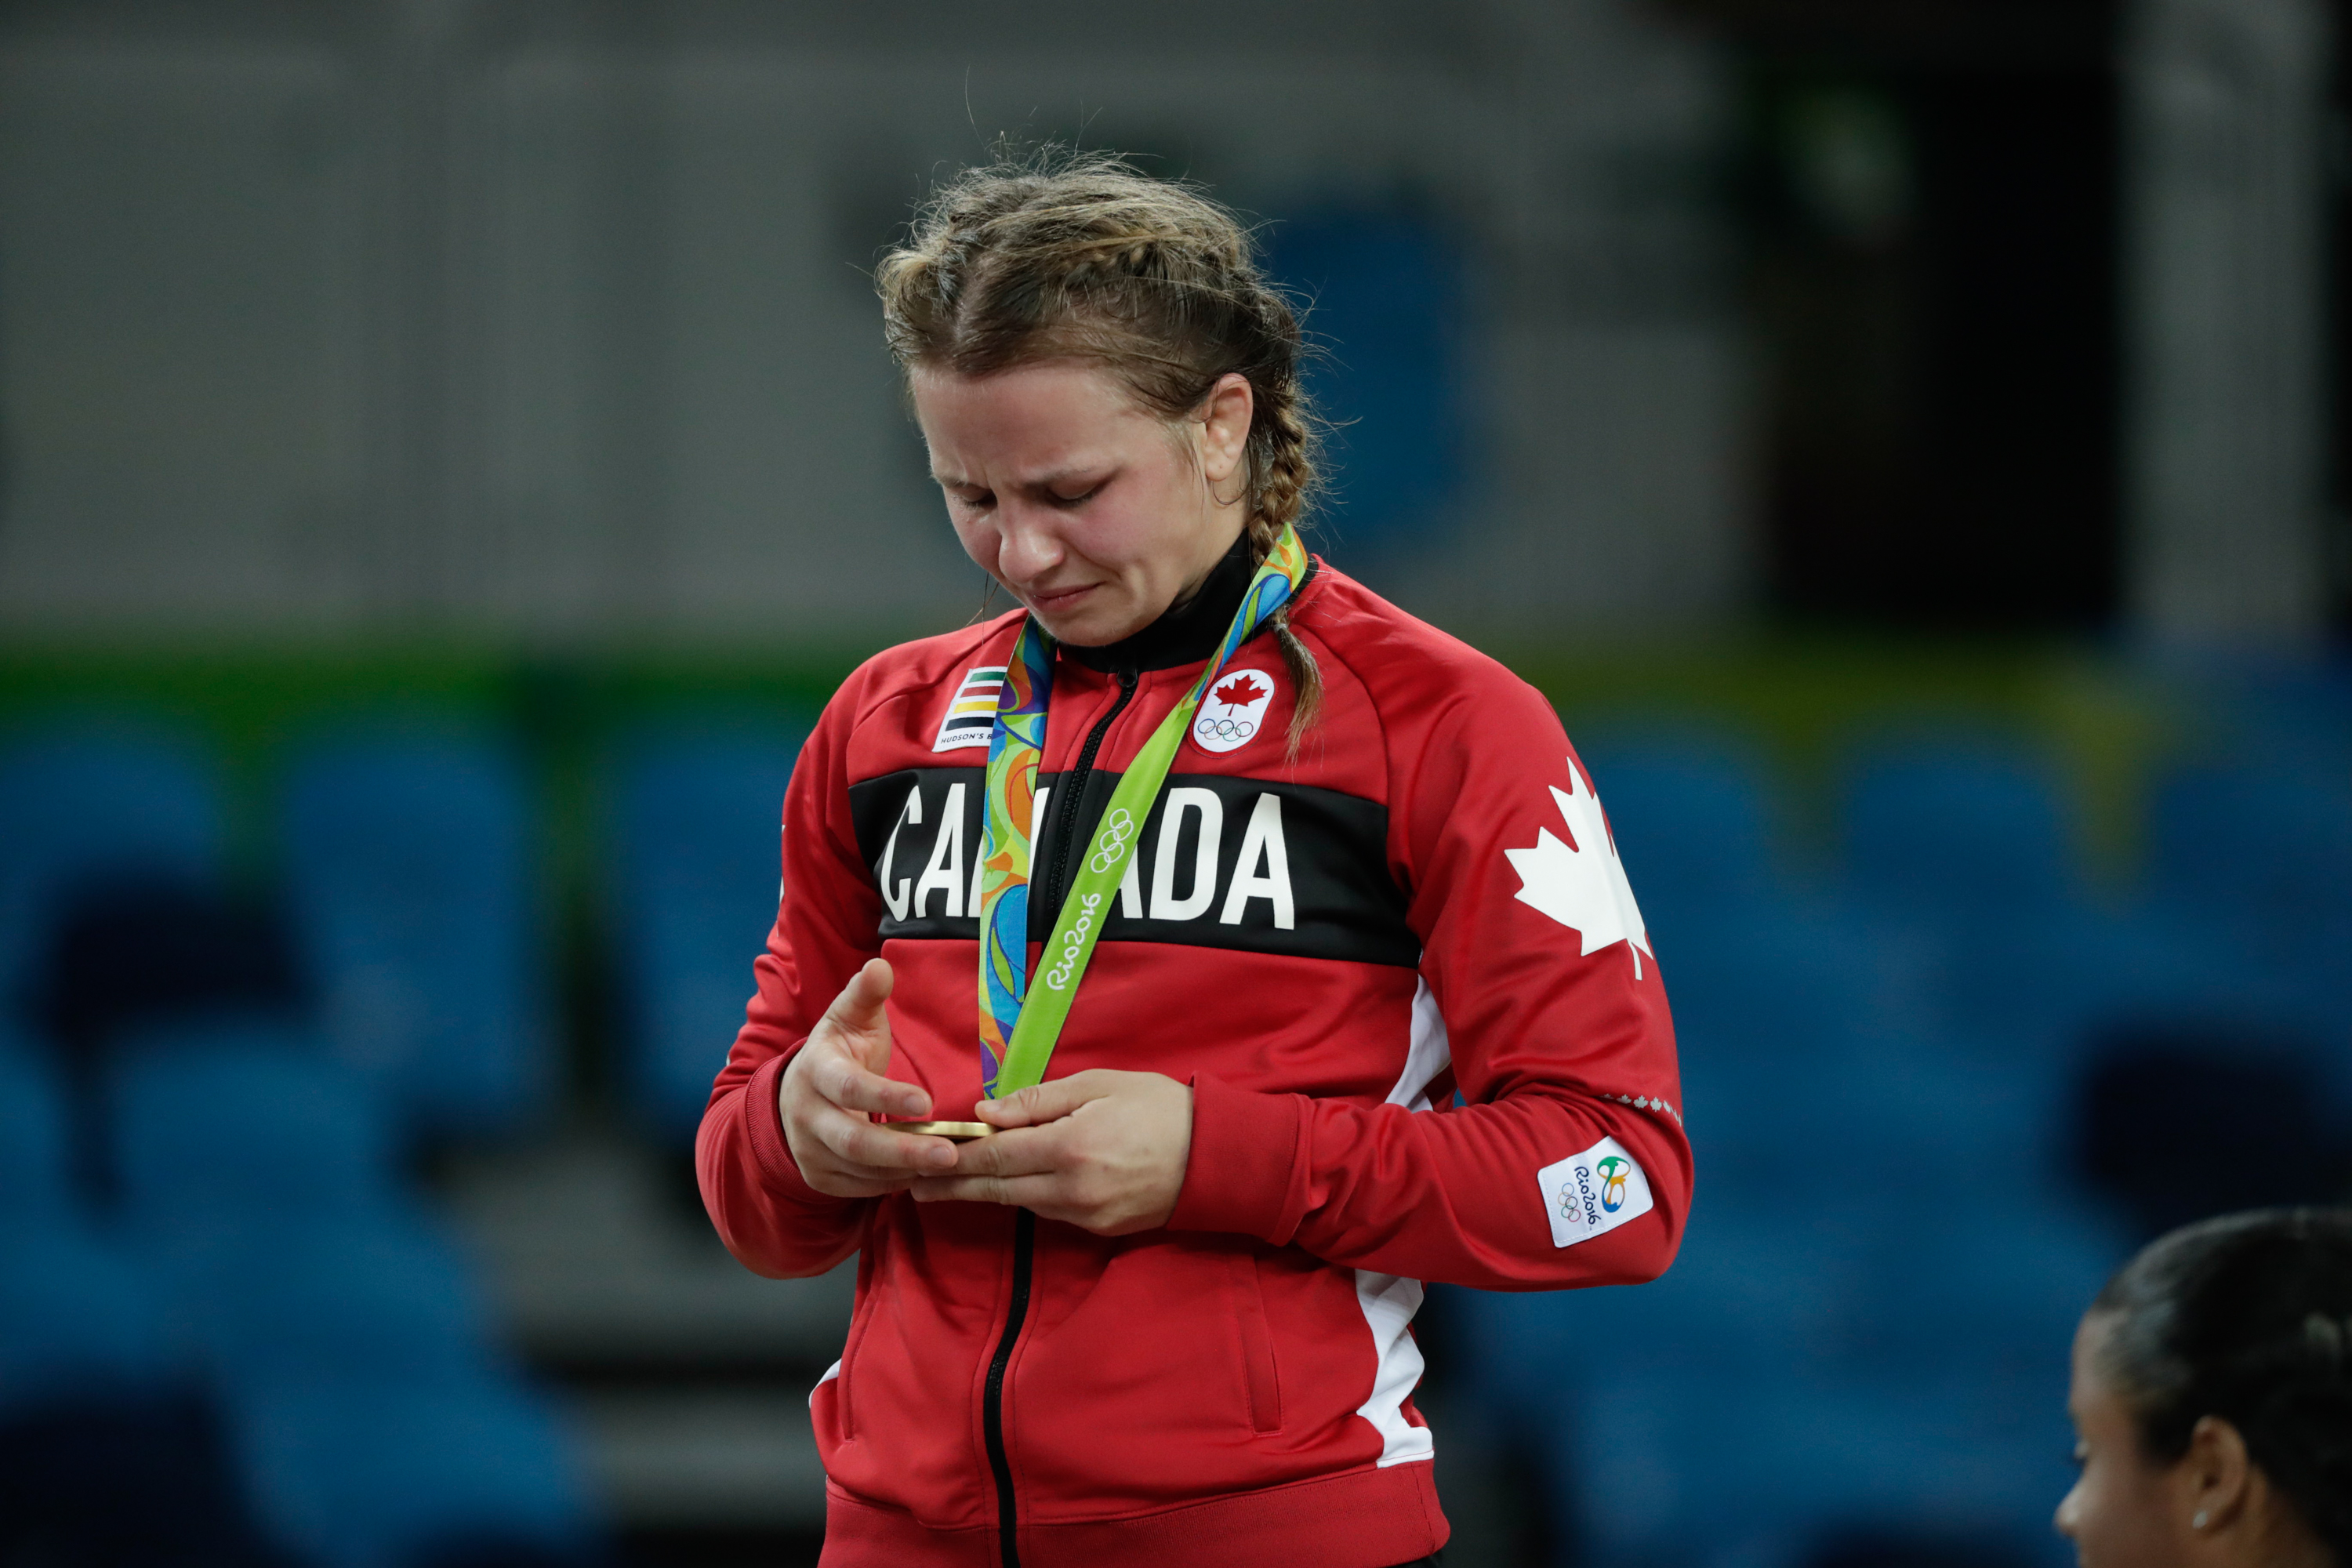 Erica Wiebe looks down at her gold medal while standing on the podium at Rio 2016 (COC/David Jackson)